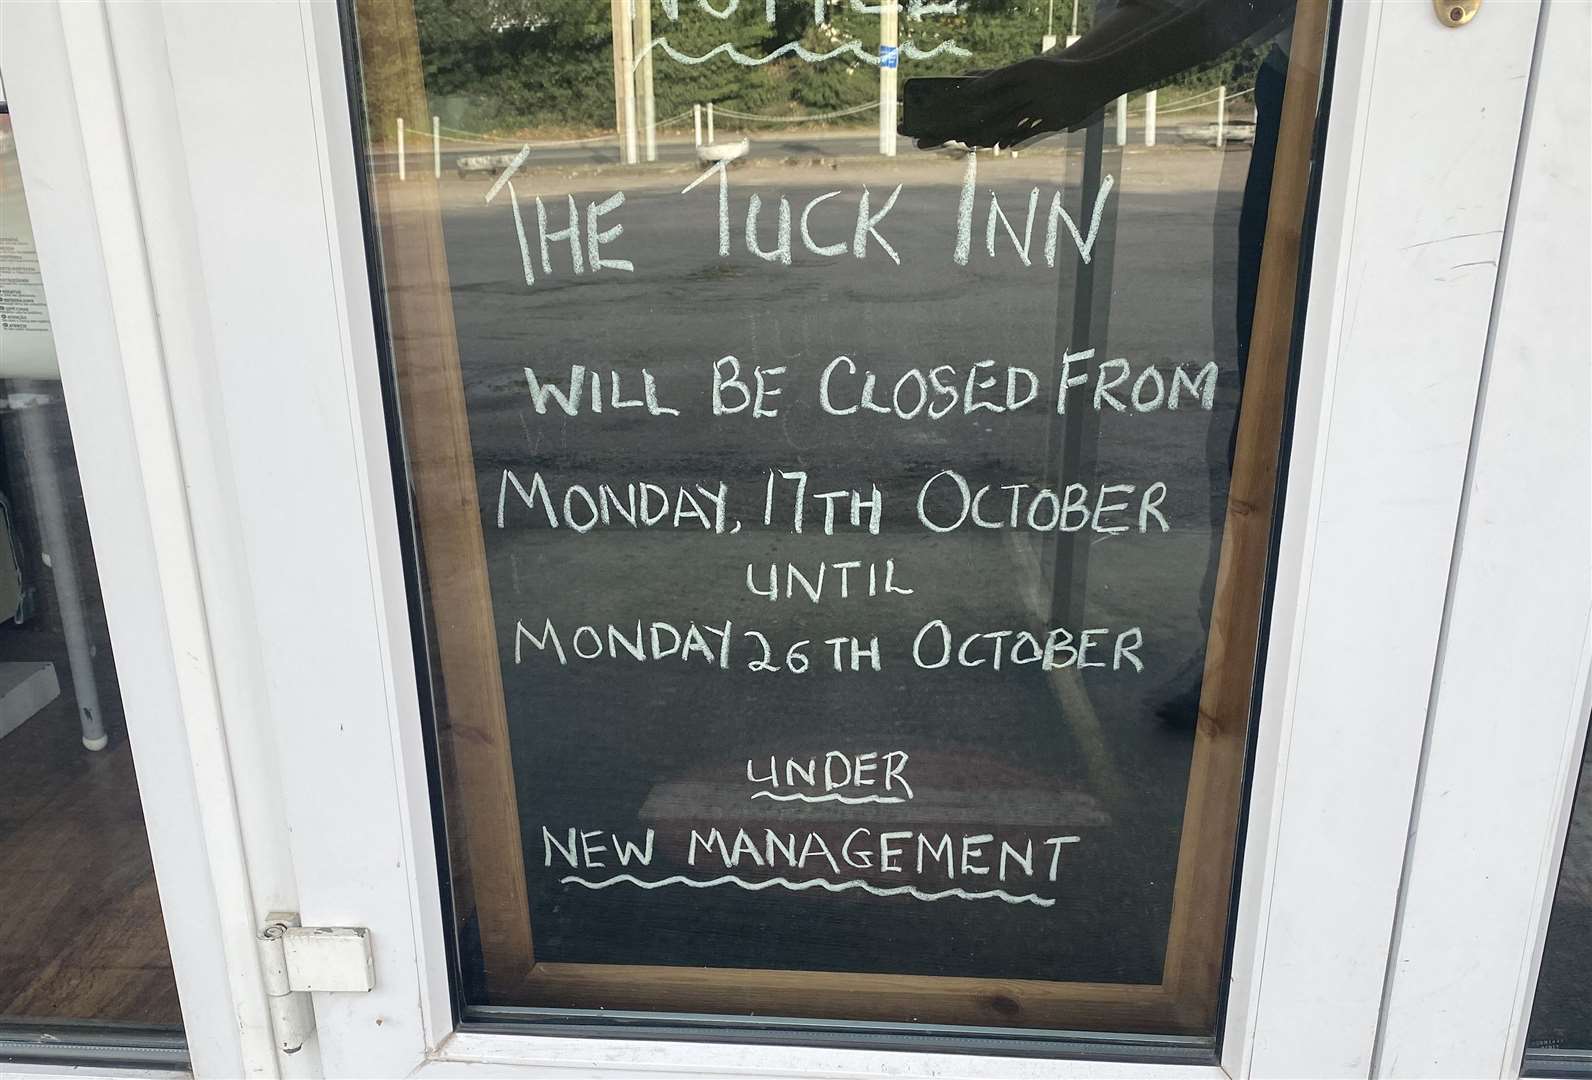 A sign in the window explaining the Tuck Inn's closure